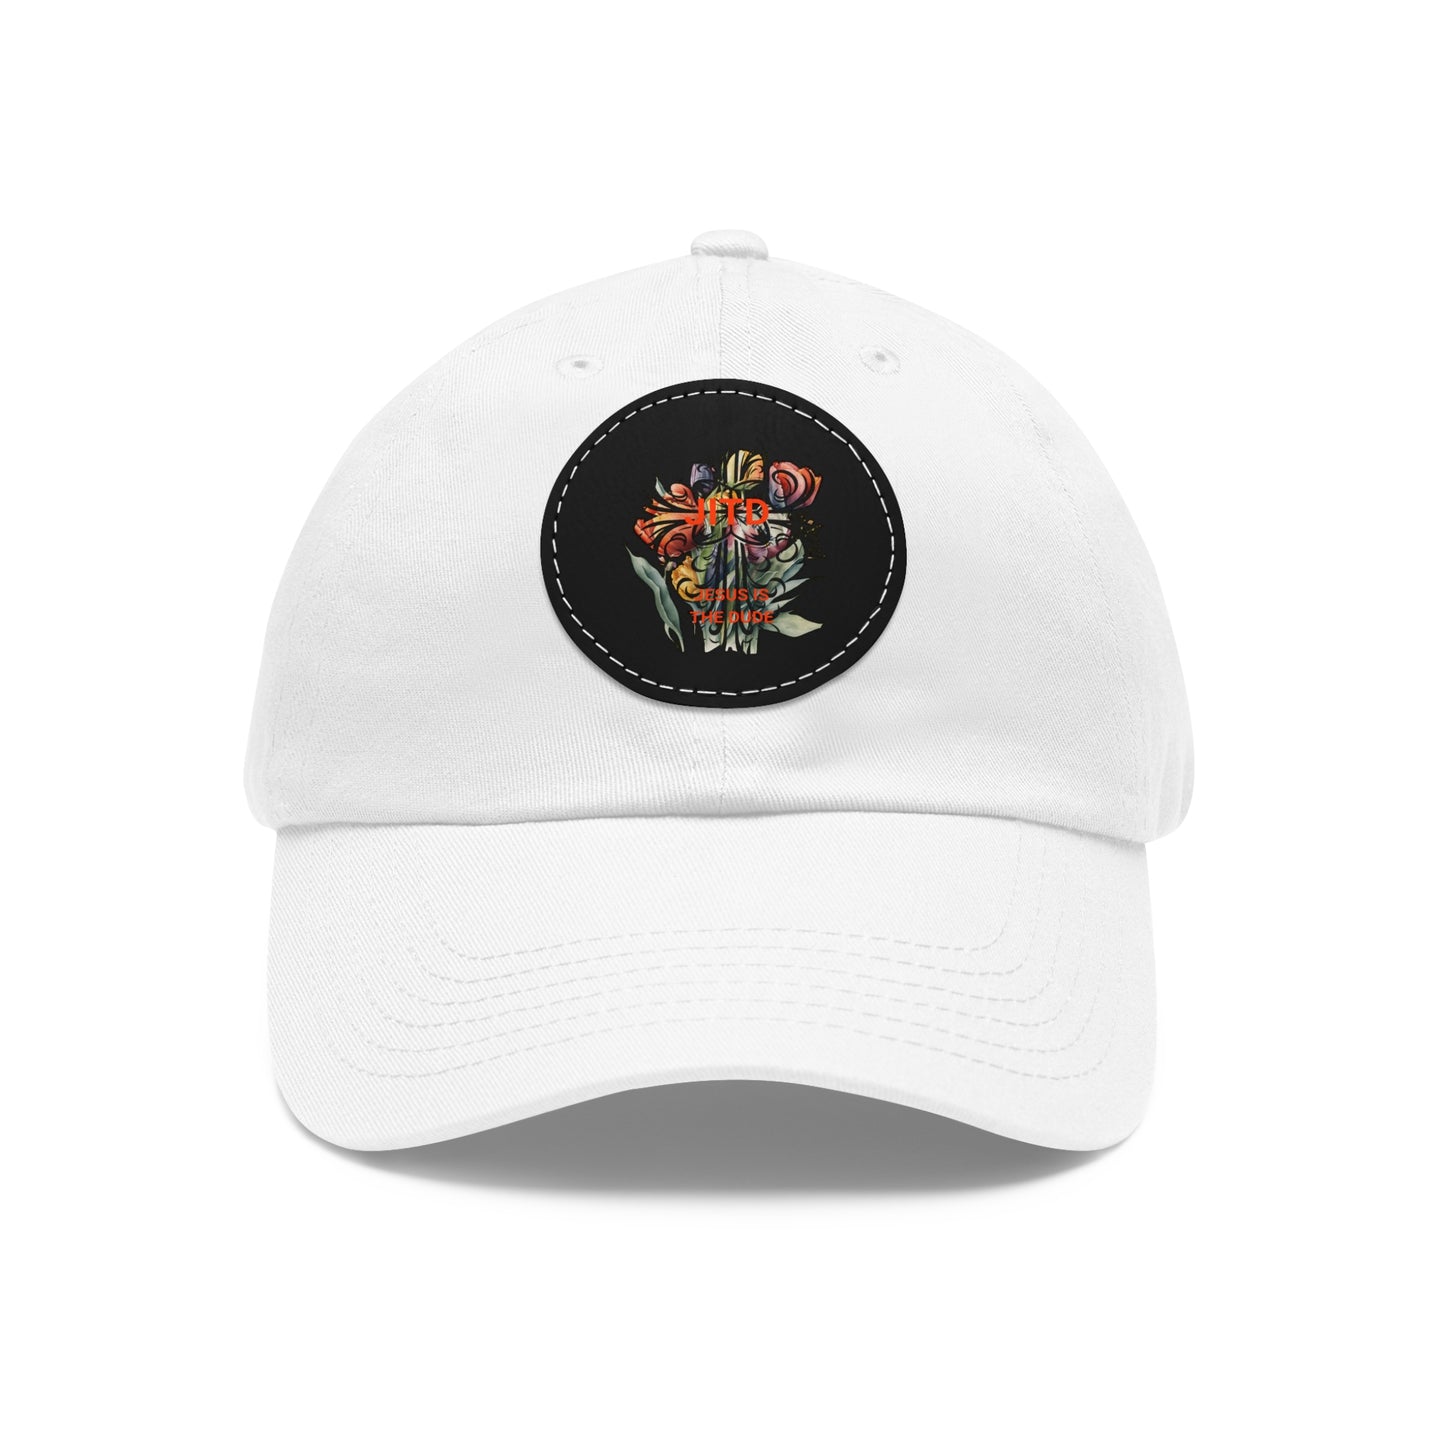 JITD BOUQUET CROSS HAT WITH LEATHER PATCH